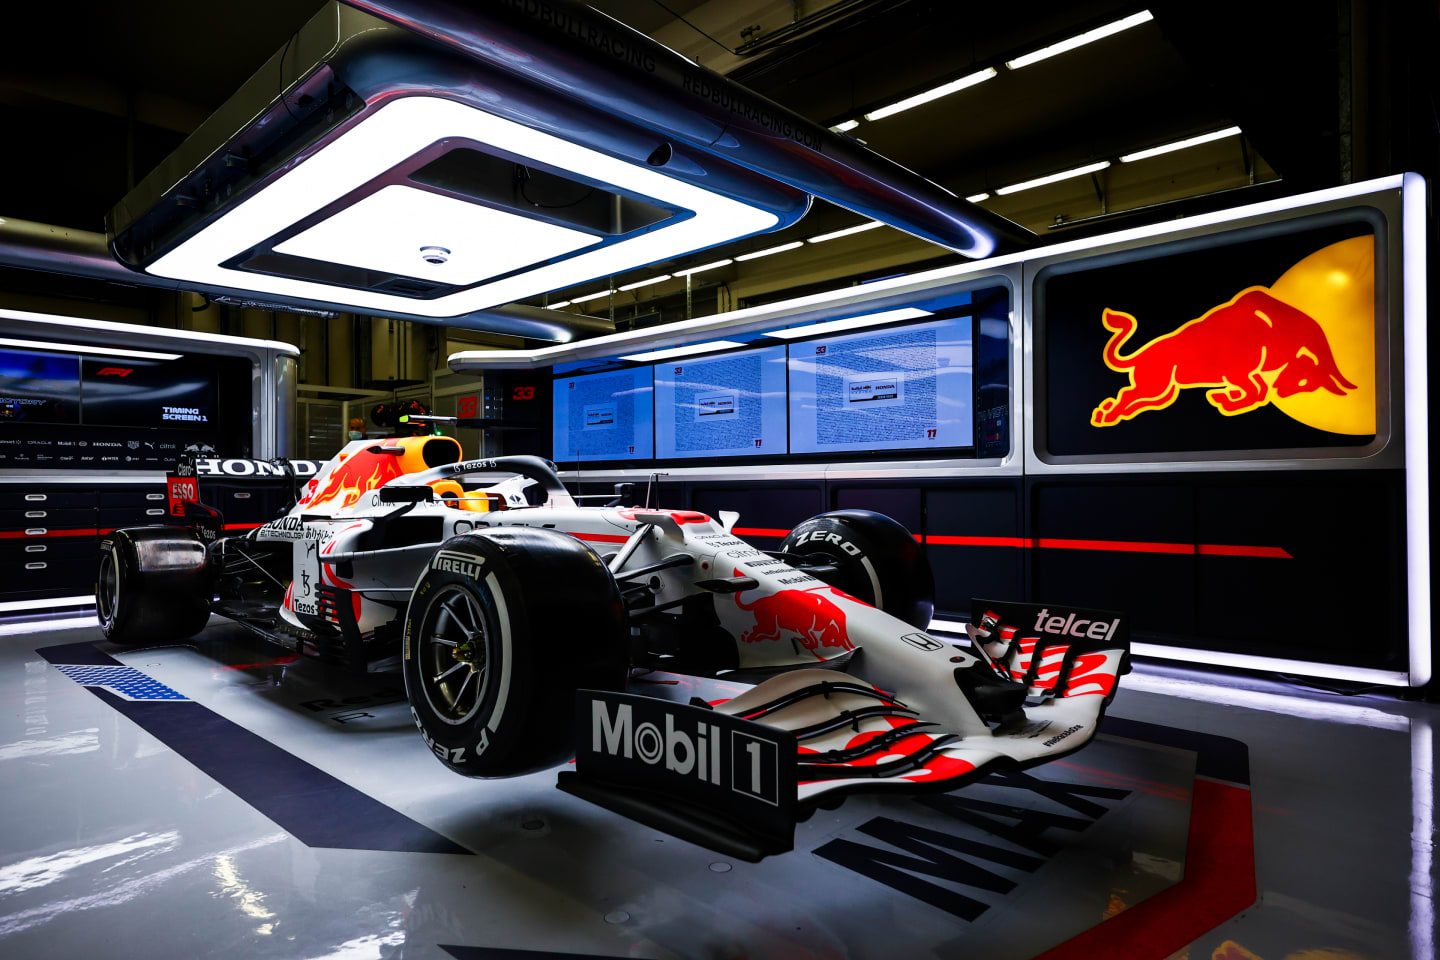 ISTANBUL, TURKEY - OCTOBER 06: The Red Bull Racing team launch a special livery to say Thank You to